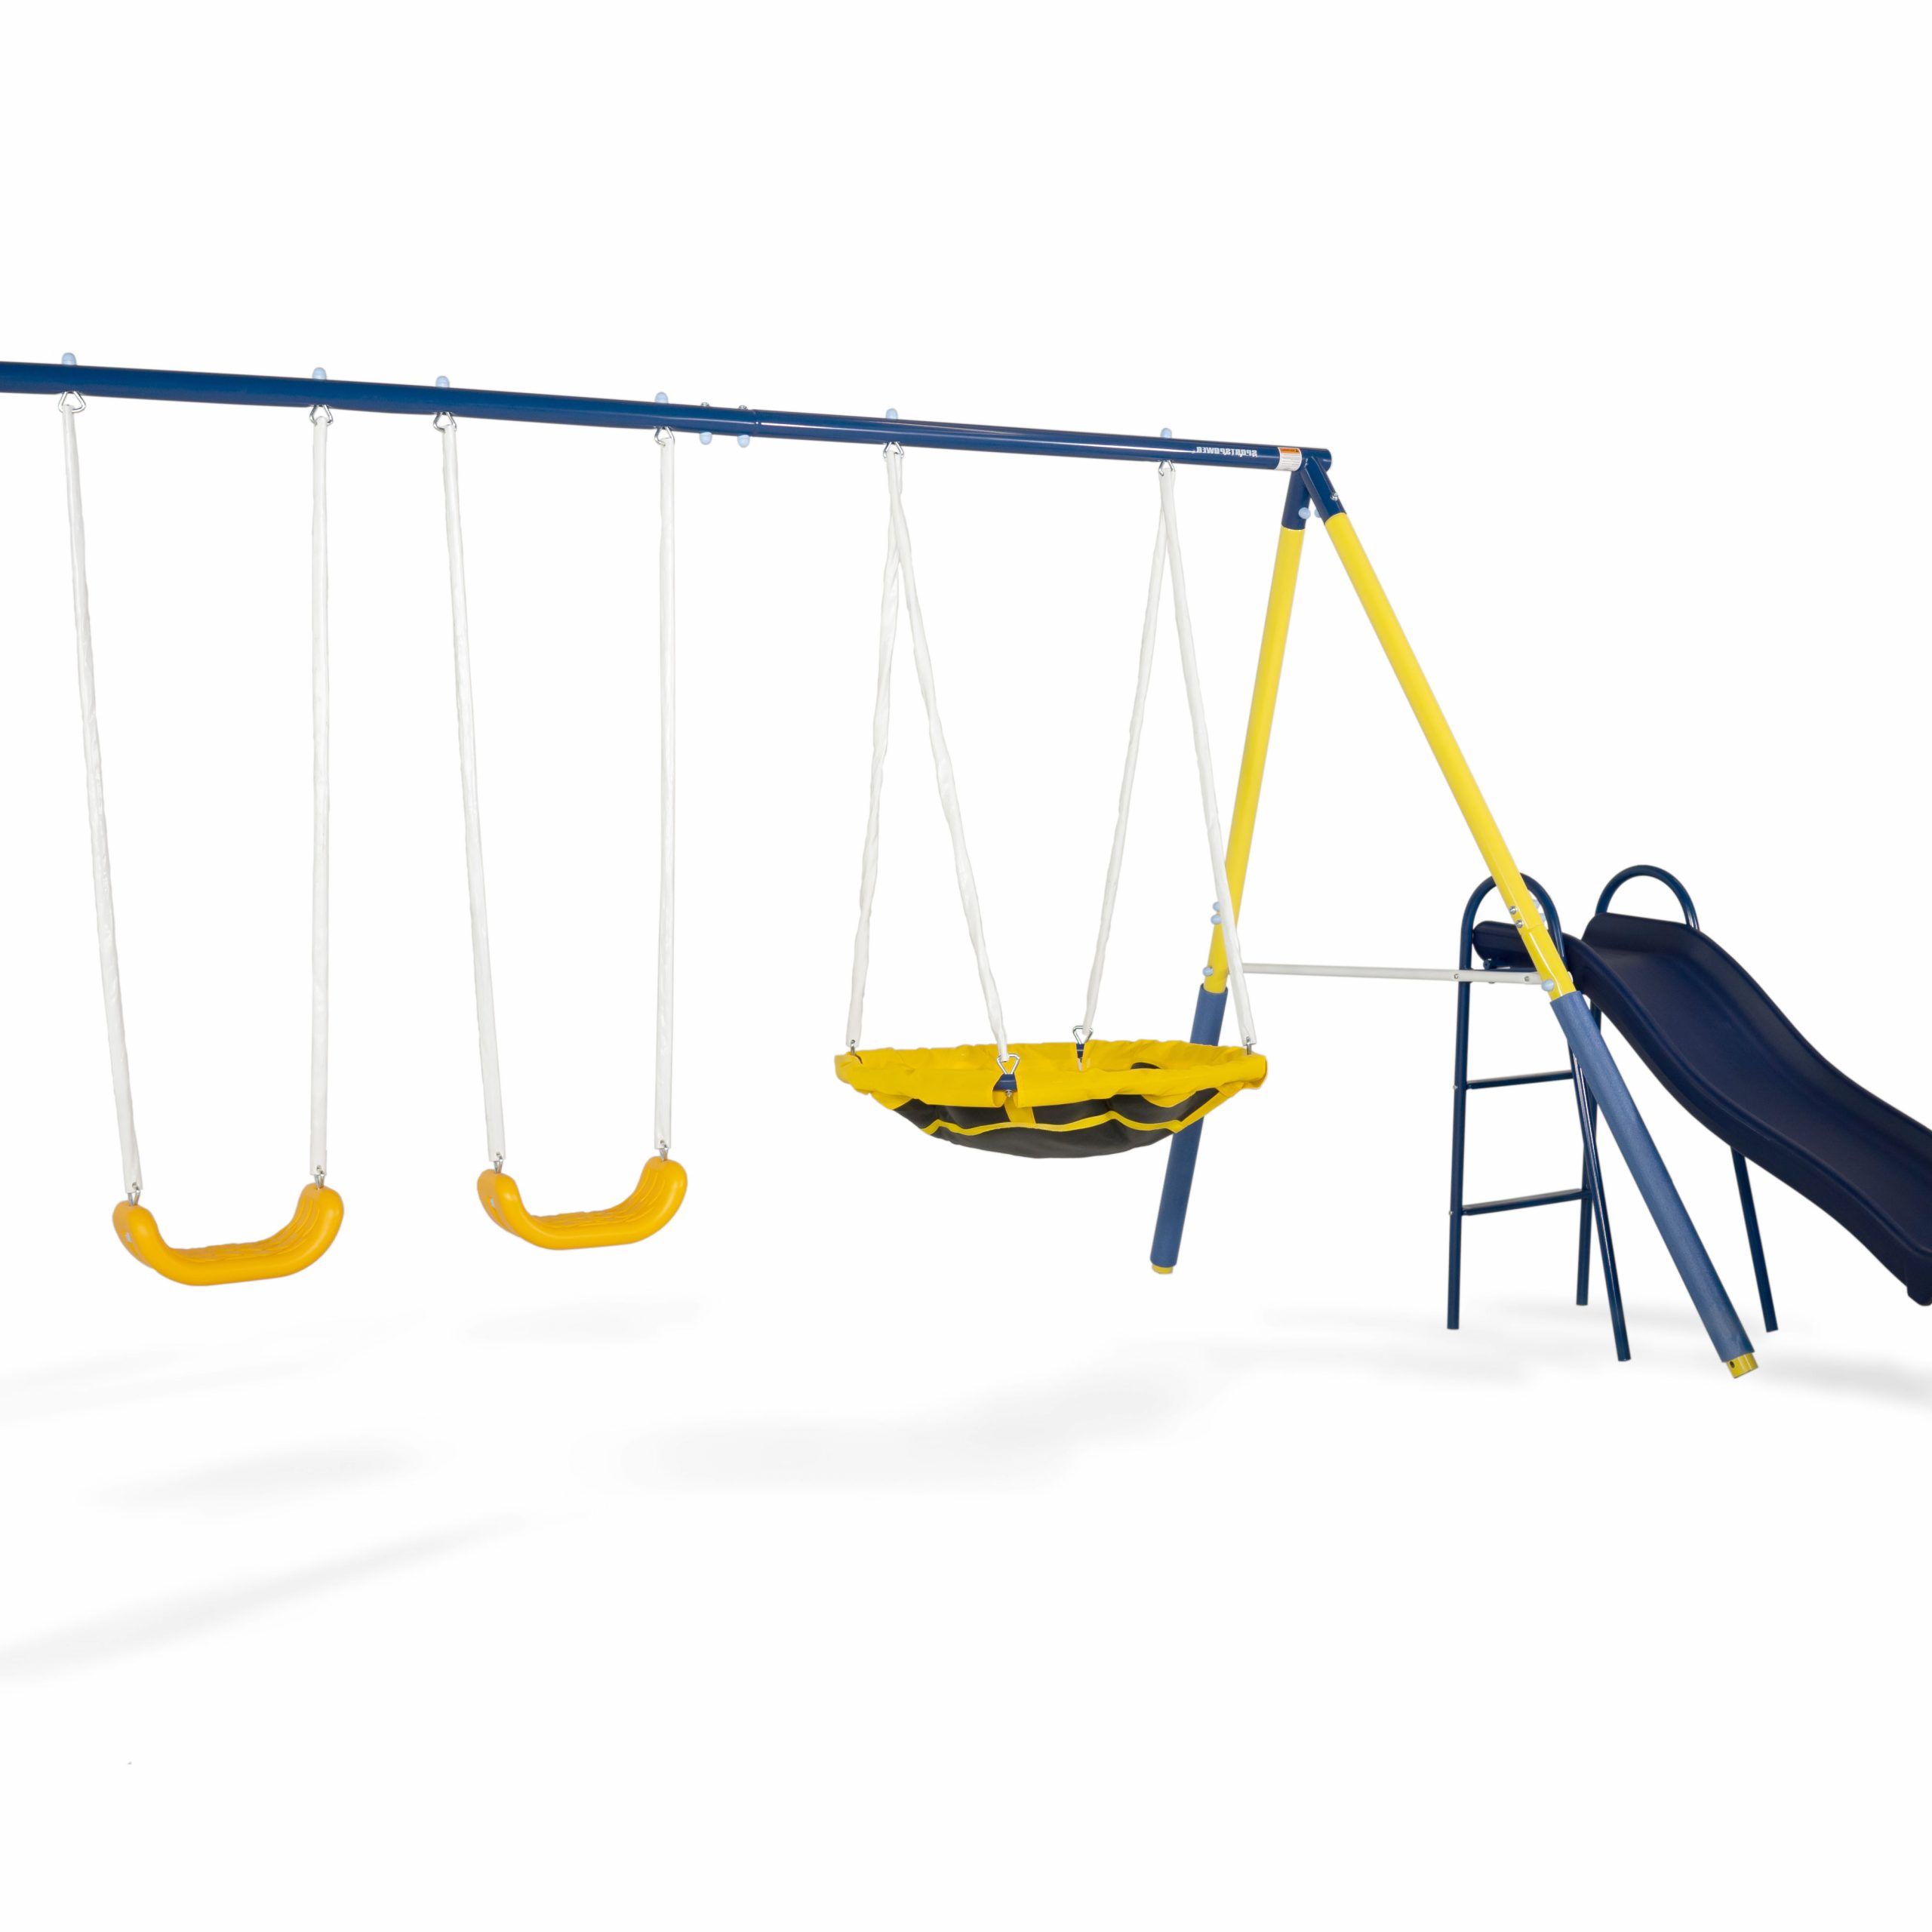 Sportspower Super Saucer Metal Swing Set With 2 Swings With Preferred Dual Rider Glider Swings With Soft Touch Rope (View 19 of 30)